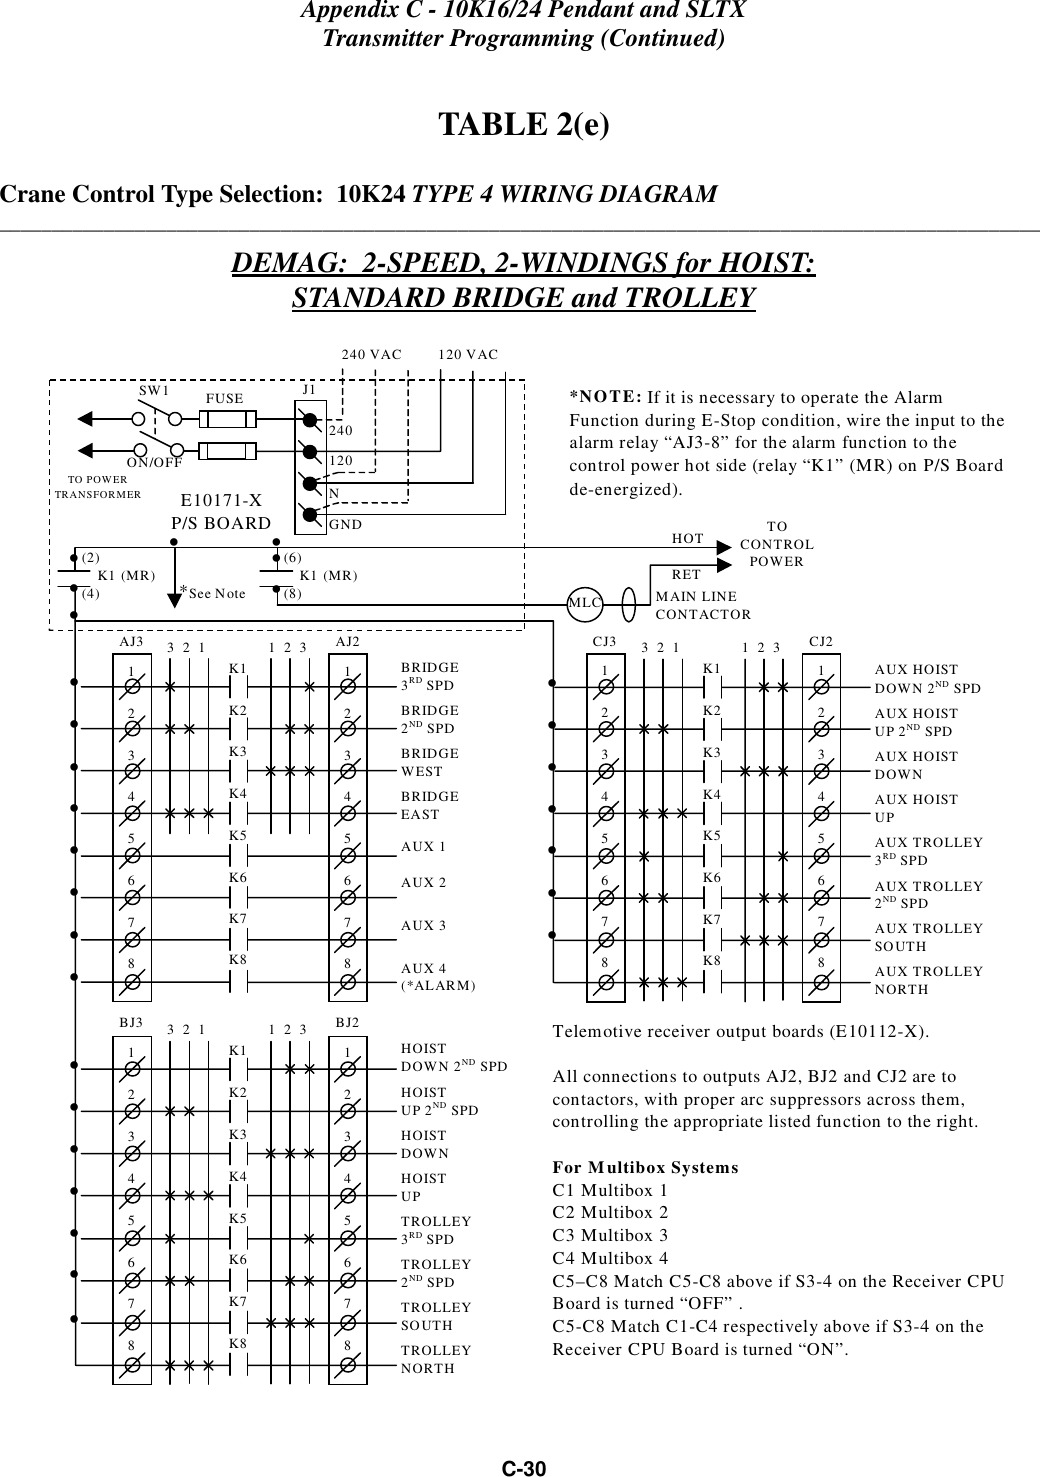 Appendix C - 10K16/24 Pendant and SLTXTransmitter Programming (Continued)C-30TABLE 2(e)Crane Control Type Selection:  10K24 TYPE 4 WIRING DIAGRAM____________________________________________________________________________________________________DEMAG:  2-SPEED, 2-WINDINGS for HOIST:STANDARD BRIDGE and TROLLEYCJ312345678CJ212345678K1K2K3K4K5K6K7K83  2  1 1  2  3AUX HOISTDOWN 2ND SPDAUX HOISTUP 2ND SPDAUX HOISTDOWNAUX HOISTUPAUX TROLLEY3RD SPDAUX TROLLEY2ND SPDAUX TROLLEYSOUTHAUX TROLLEYNORTH• • • • • • • BJ312345678BJ212345678K1K2K3K4K5K6K7K83  2  1 1  2  3HOISTDOWN 2ND SPDHOISTUP 2ND SPDHOISTDOWNHOISTUPTROLLEY3RD SPDTROLLEY2ND SPDTROLLEYSOUTHTROLLEYNORTH• • • • • • AJ312345678AJ212345678K1K2K3K4K5K6K7K83  2  1 1  2  3BRIDGE3RD SPDBRIDGE2ND SPDBRIDGEWESTBRIDGEEASTAUX 1AUX 2AUX 3AUX 4(*ALARM)• • • • • • • • *NOTE: If it is necessary to operate the AlarmFunction during E-Stop condition, wire the input to thealarm relay “AJ3-8” for the alarm function to thecontrol power hot side (relay “K1” (MR) on P/S Boardde-energized).240 VAC         120 VACSW1ON/OFFTO POWERTRANSFORMER E10171-XP/S BOARDMAIN LINECONTACTORTOCONTROLPOWERMLCHOTRET(2)    K1   (MR)(4)• • • *See Note• 240120FUSE J1NGND(6)    K1   (MR)(8)• • • • Telemotive receiver output boards (E10112-X).All connections to outputs AJ2, BJ2 and CJ2 are tocontactors, with proper arc suppressors across them,controlling the appropriate listed function to the right.For Multibox SystemsC1 Multibox 1C2 Multibox 2C3 Multibox 3C4 Multibox 4C5–C8 Match C5-C8 above if S3-4 on the Receiver CPUBoard is turned “OFF” .C5-C8 Match C1-C4 respectively above if S3-4 on theReceiver CPU Board is turned “ON”.